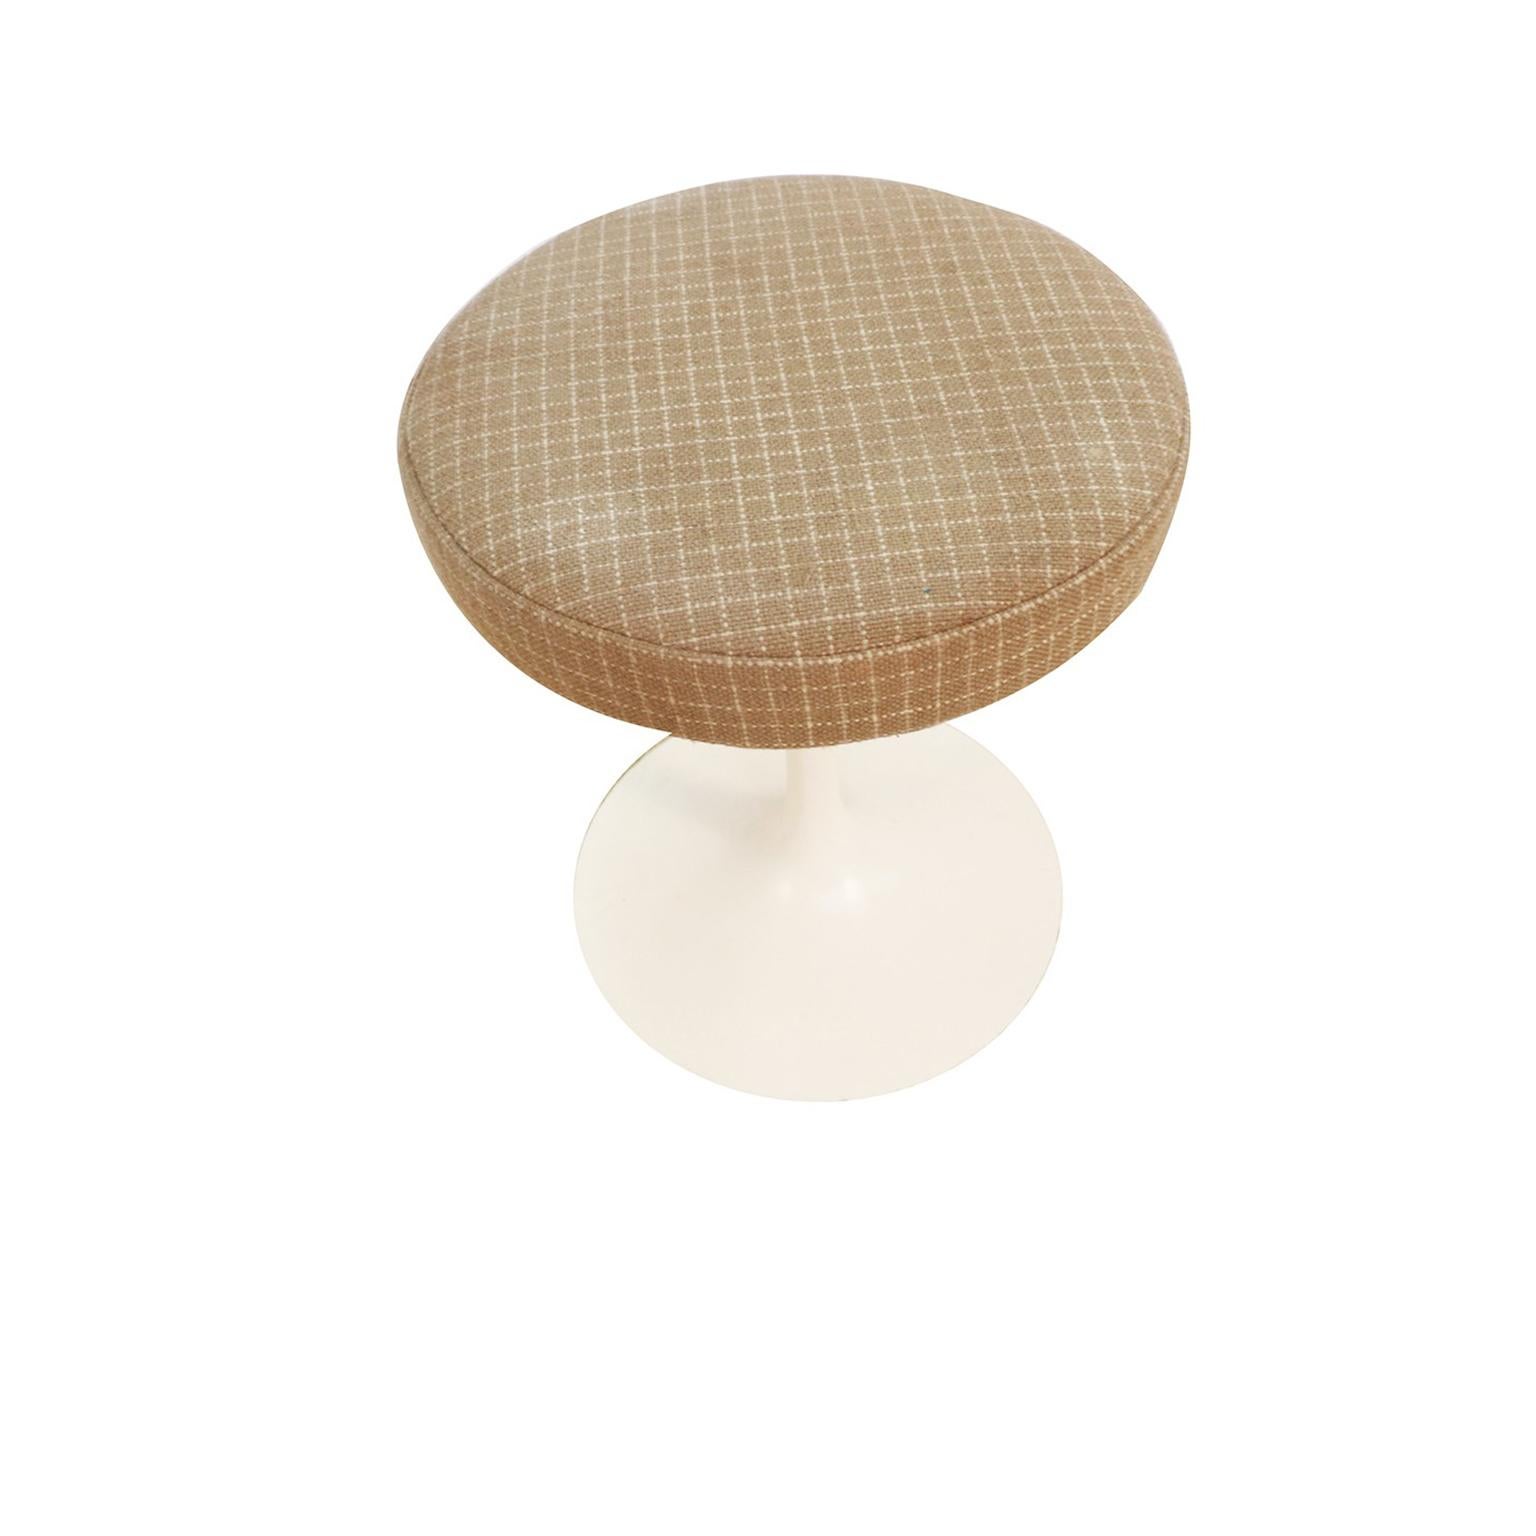 Classic Mid-Century Modern swivel “Tulip” stool designed by Eero Saarinen (USA 1910-1961) for Knoll Furniture International in 1956. Features original beige wool upholstery with contrasting coral red check grid lines covering a padded circular seat